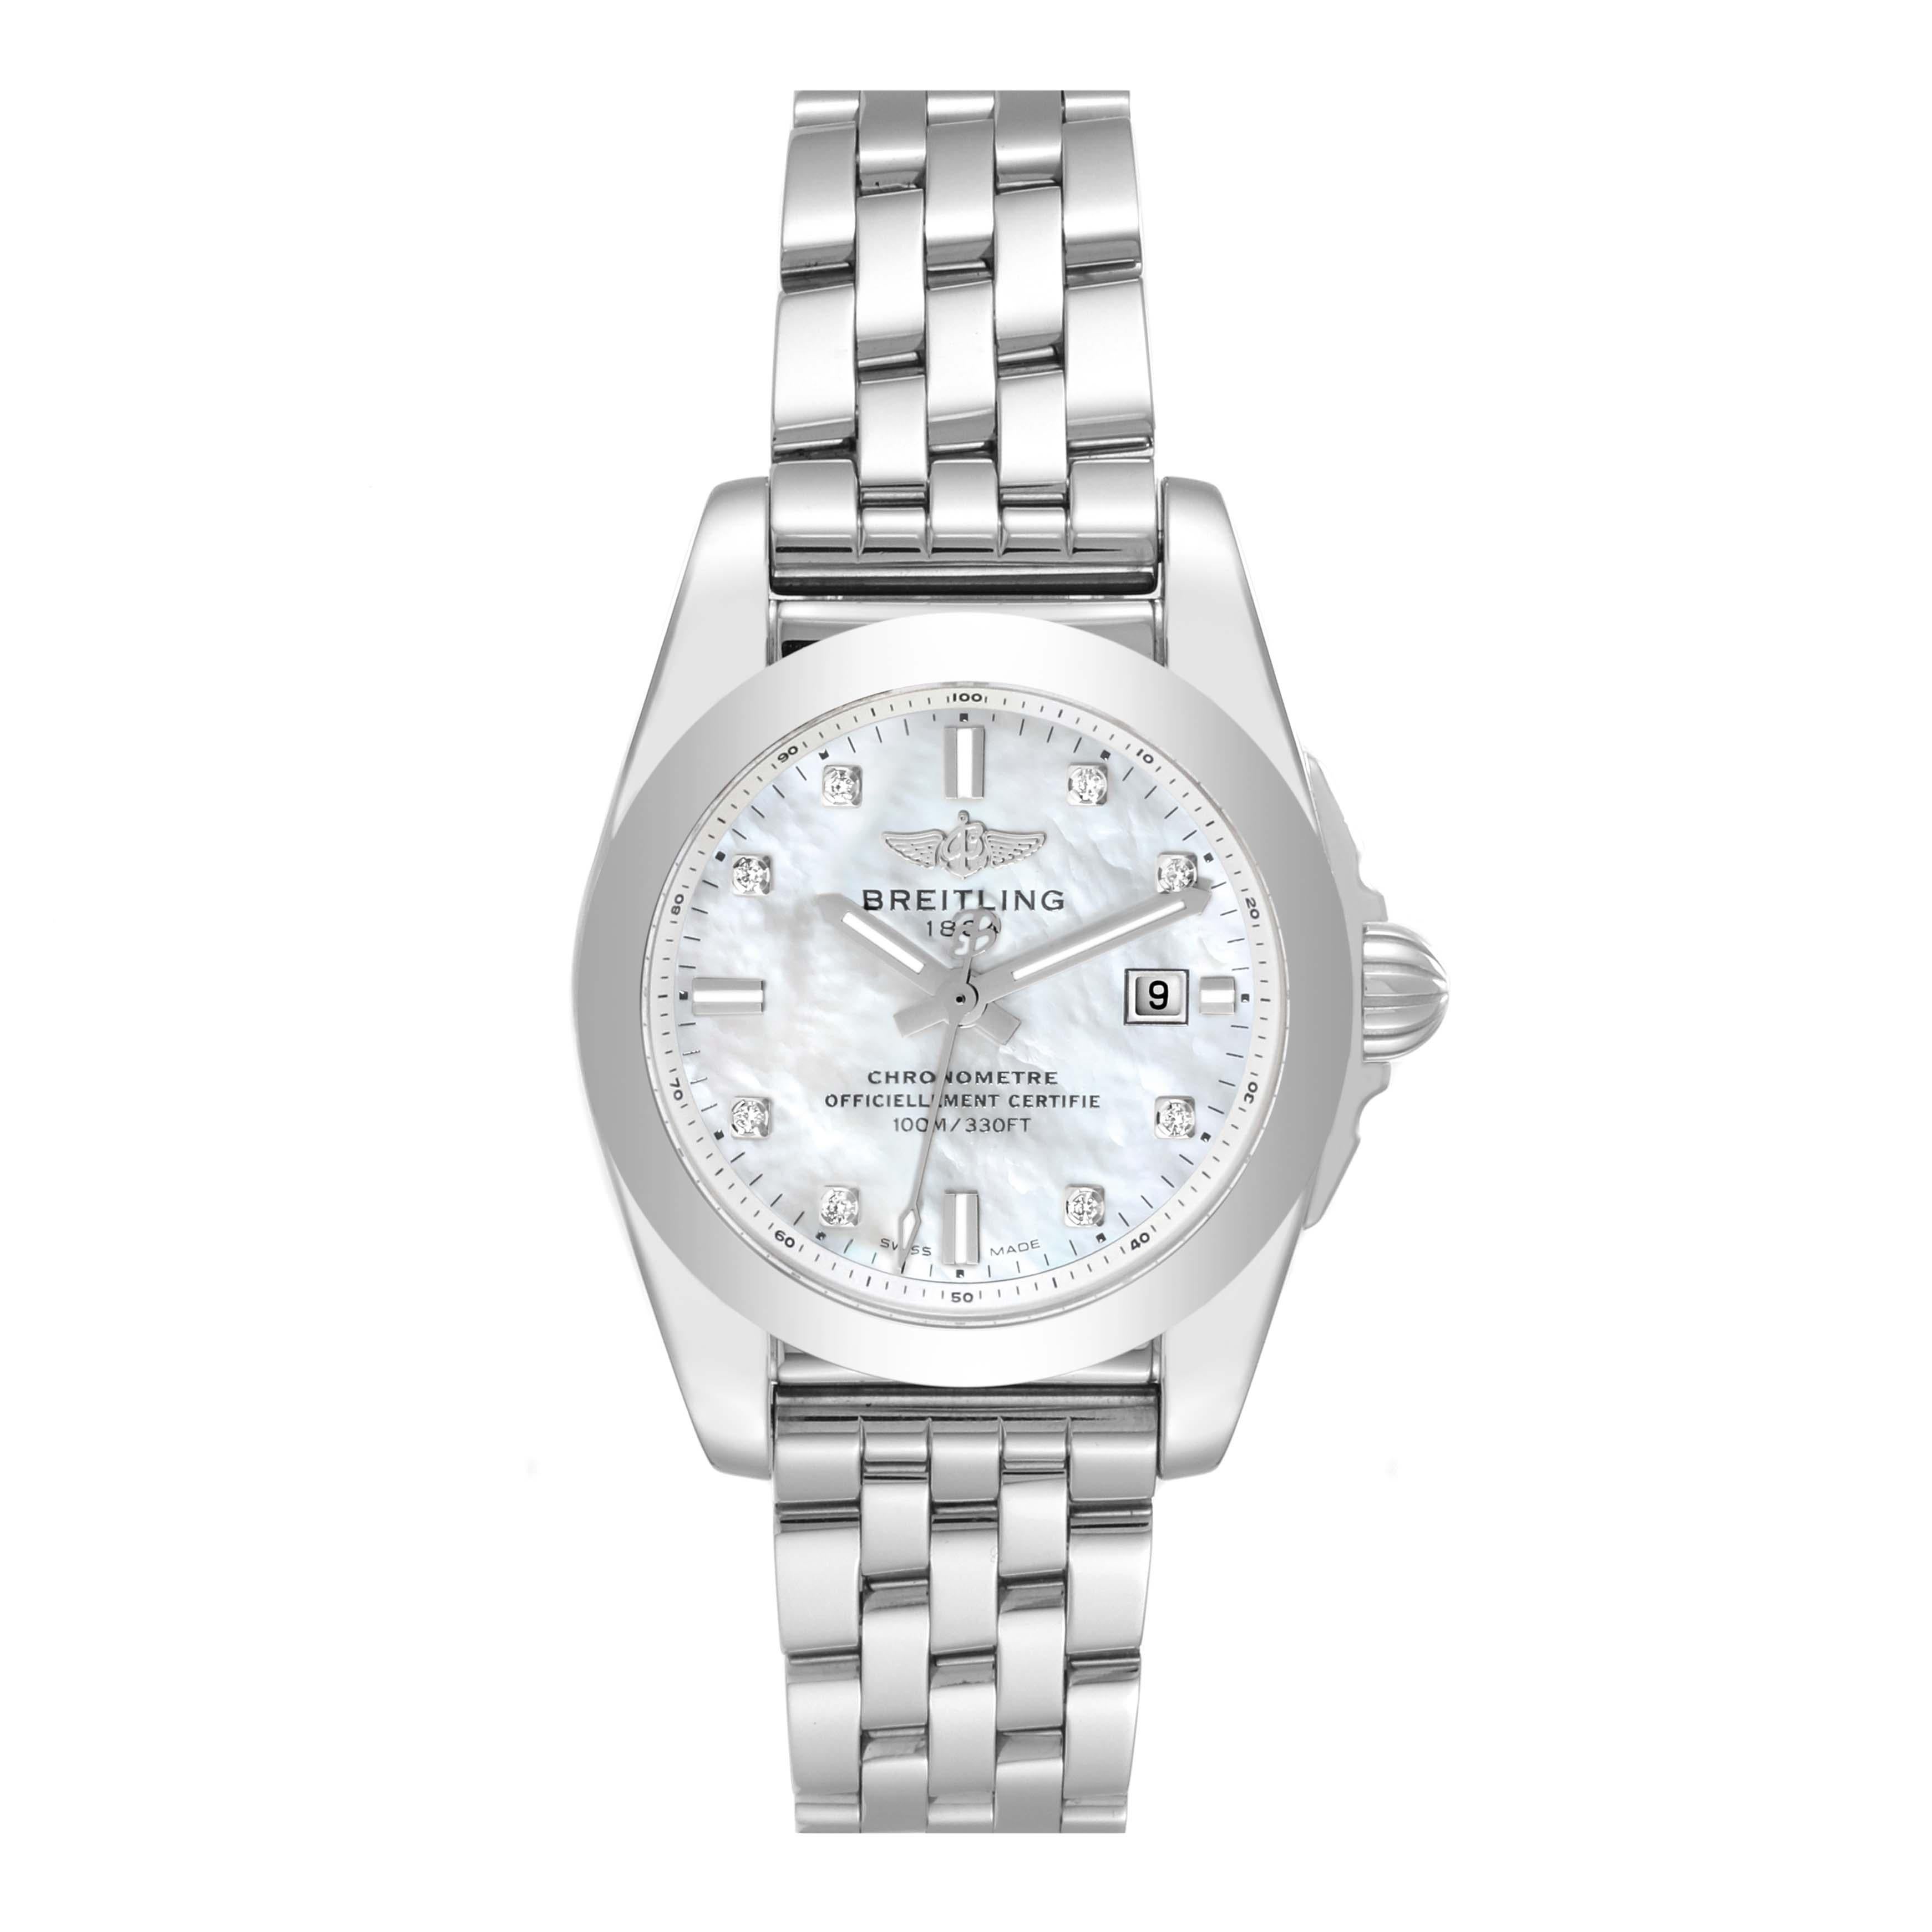 Breitling Galactic 29mm MOP Diamond Dial Steel Ladies Watch W72348 Unworn. Quartz movement. Stainless steel case 29.0 mm in diameter. Stainless steel bezel. Scratch resistant sapphire crystal. Mother of pearl dial with original Breitling factory